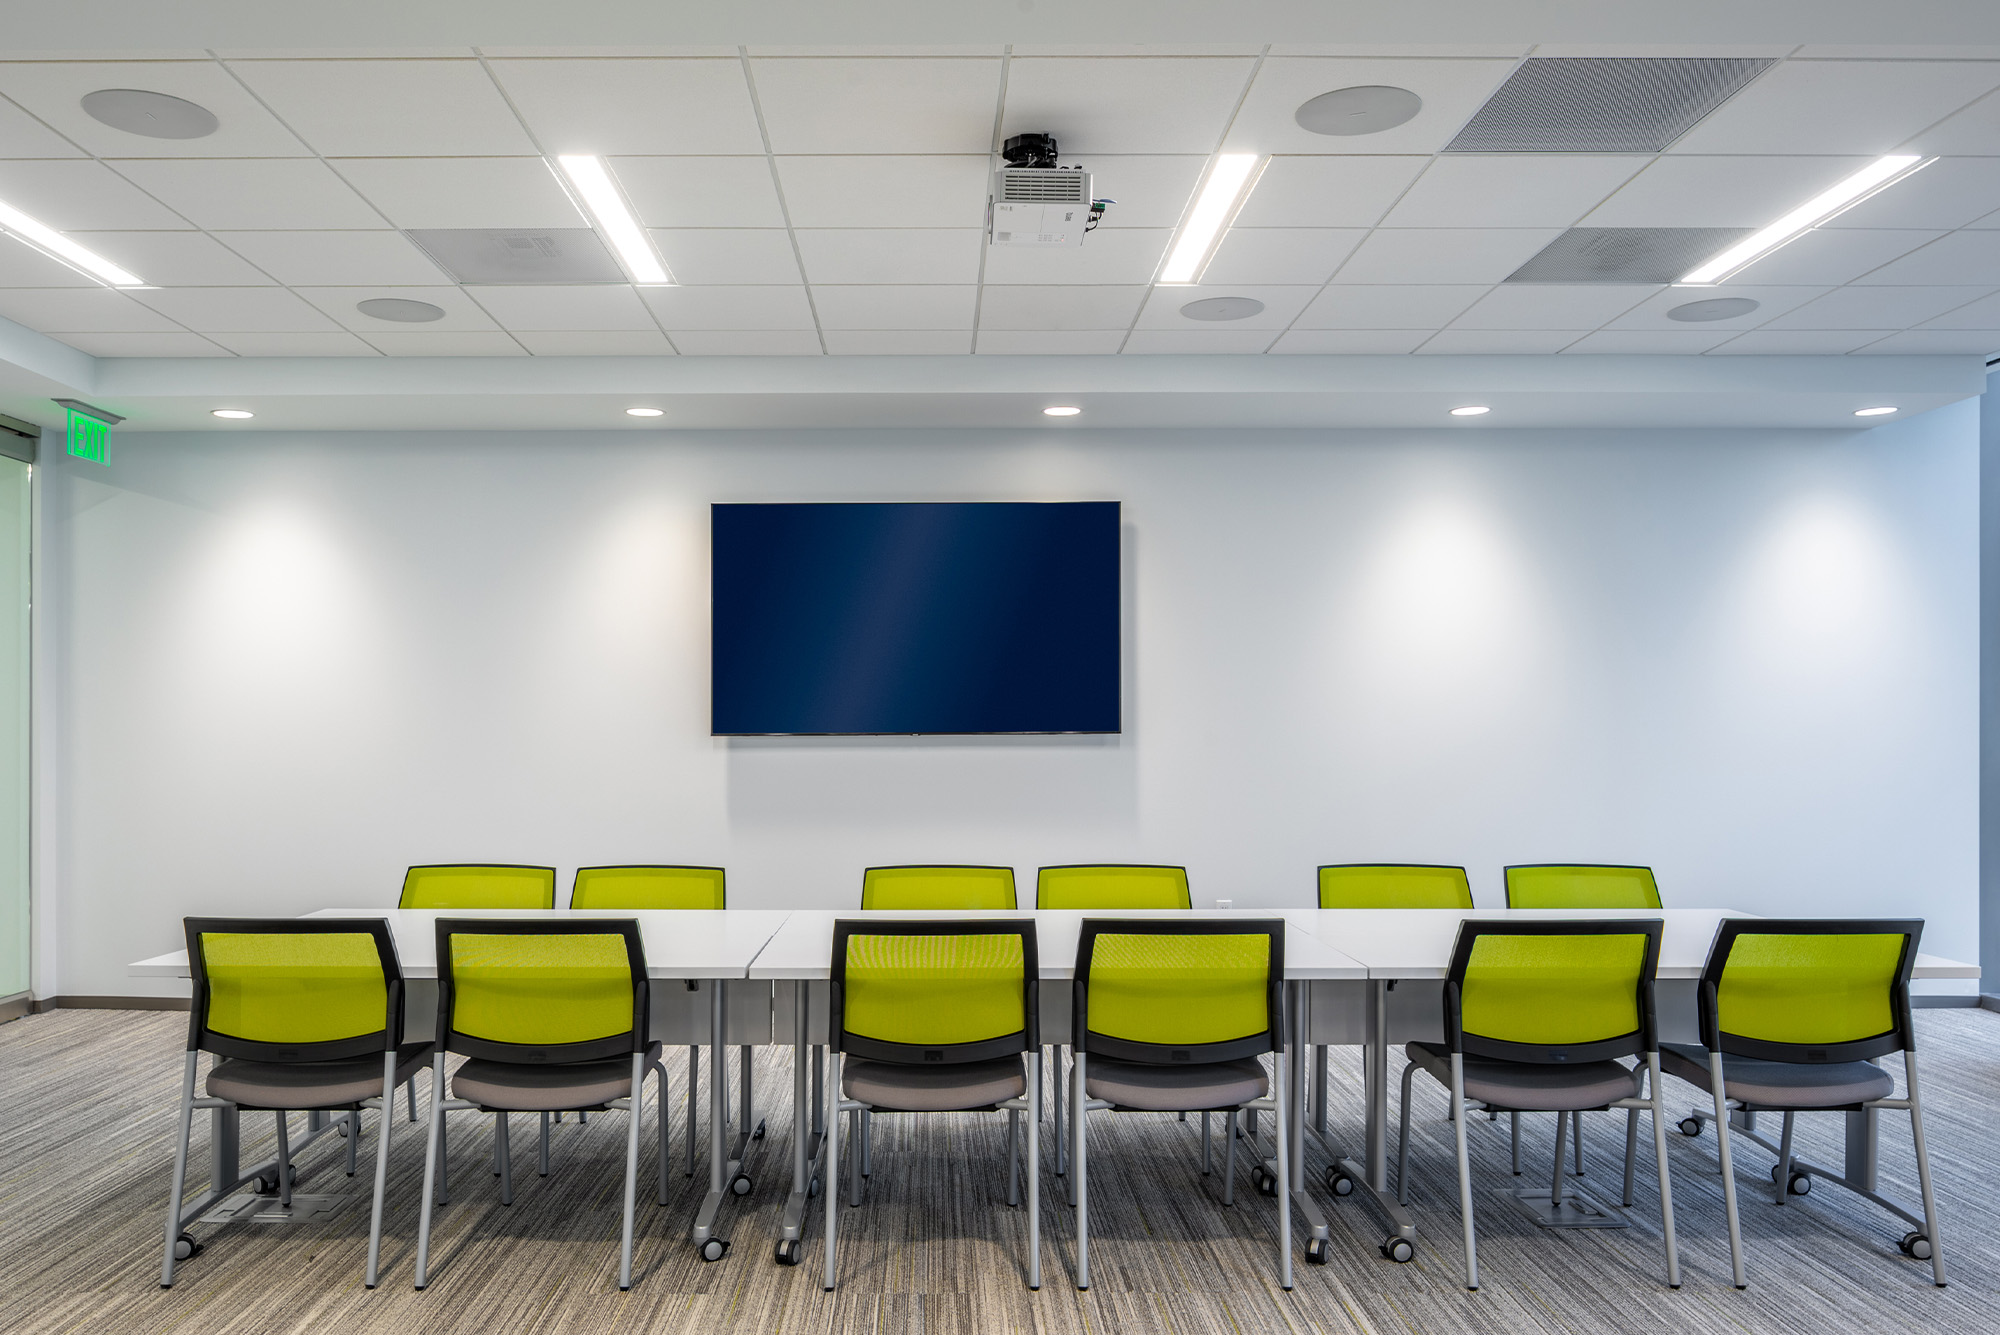 Clean, modern conference room with a large TV